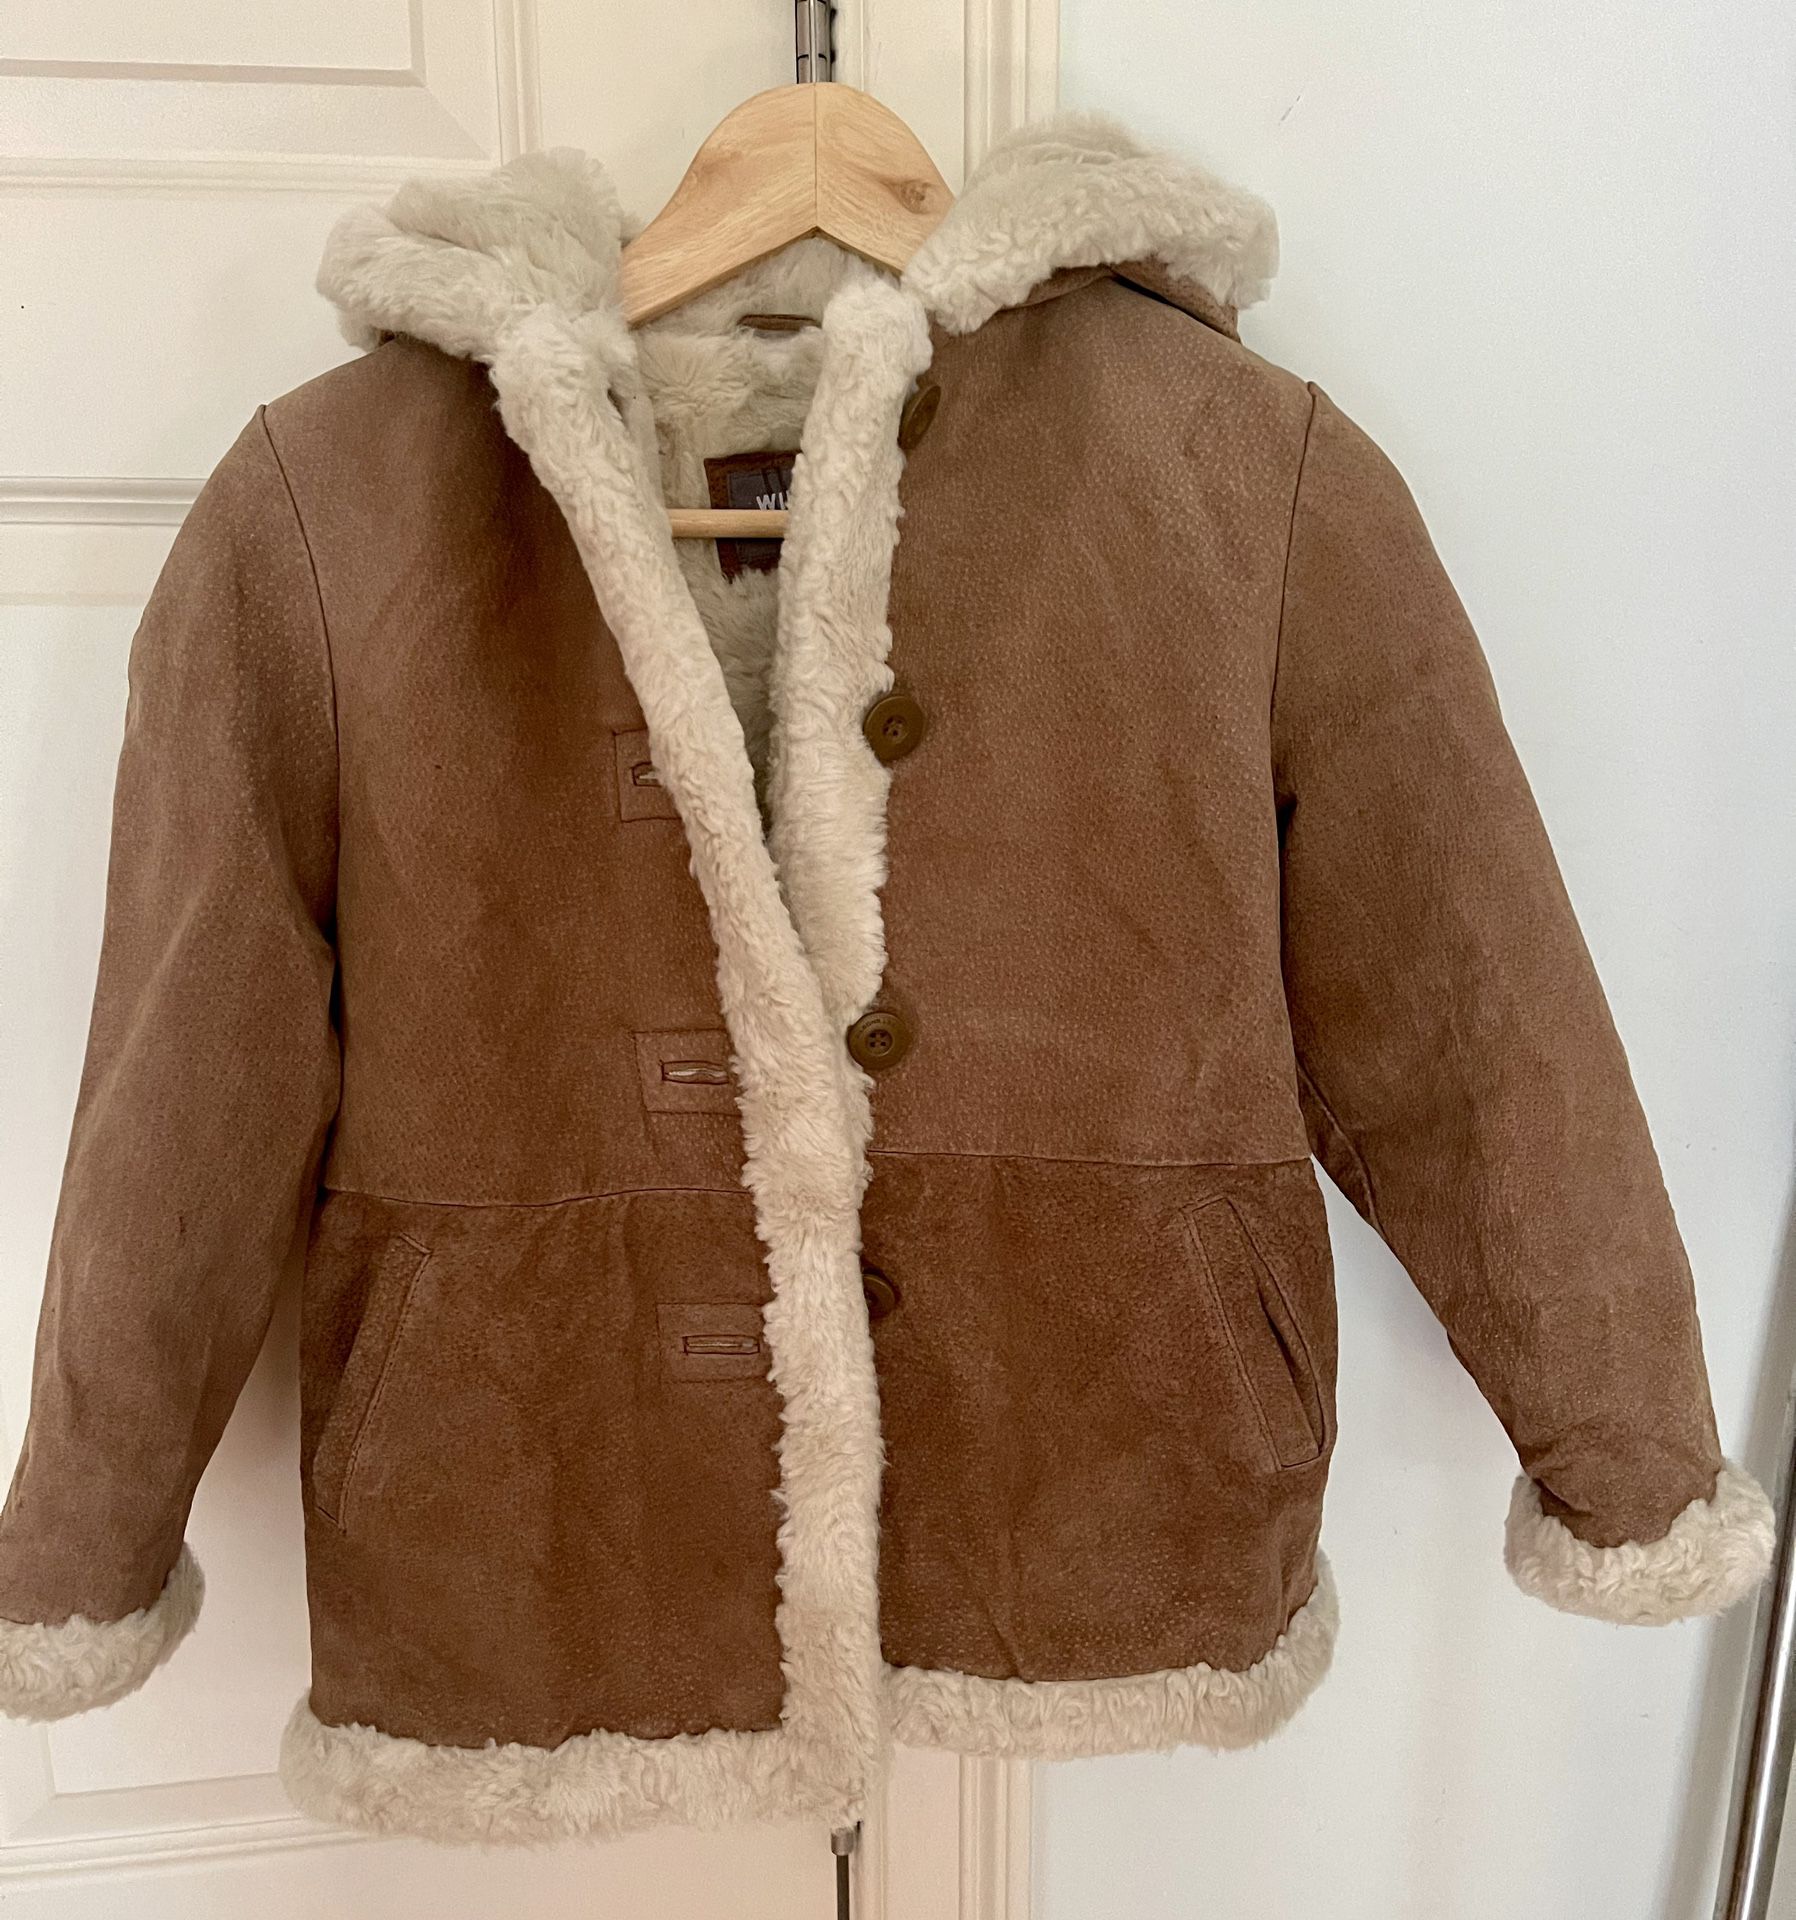 NWOT Wilson Kids Tan Suede Leather With Hood & Faux Fur, L